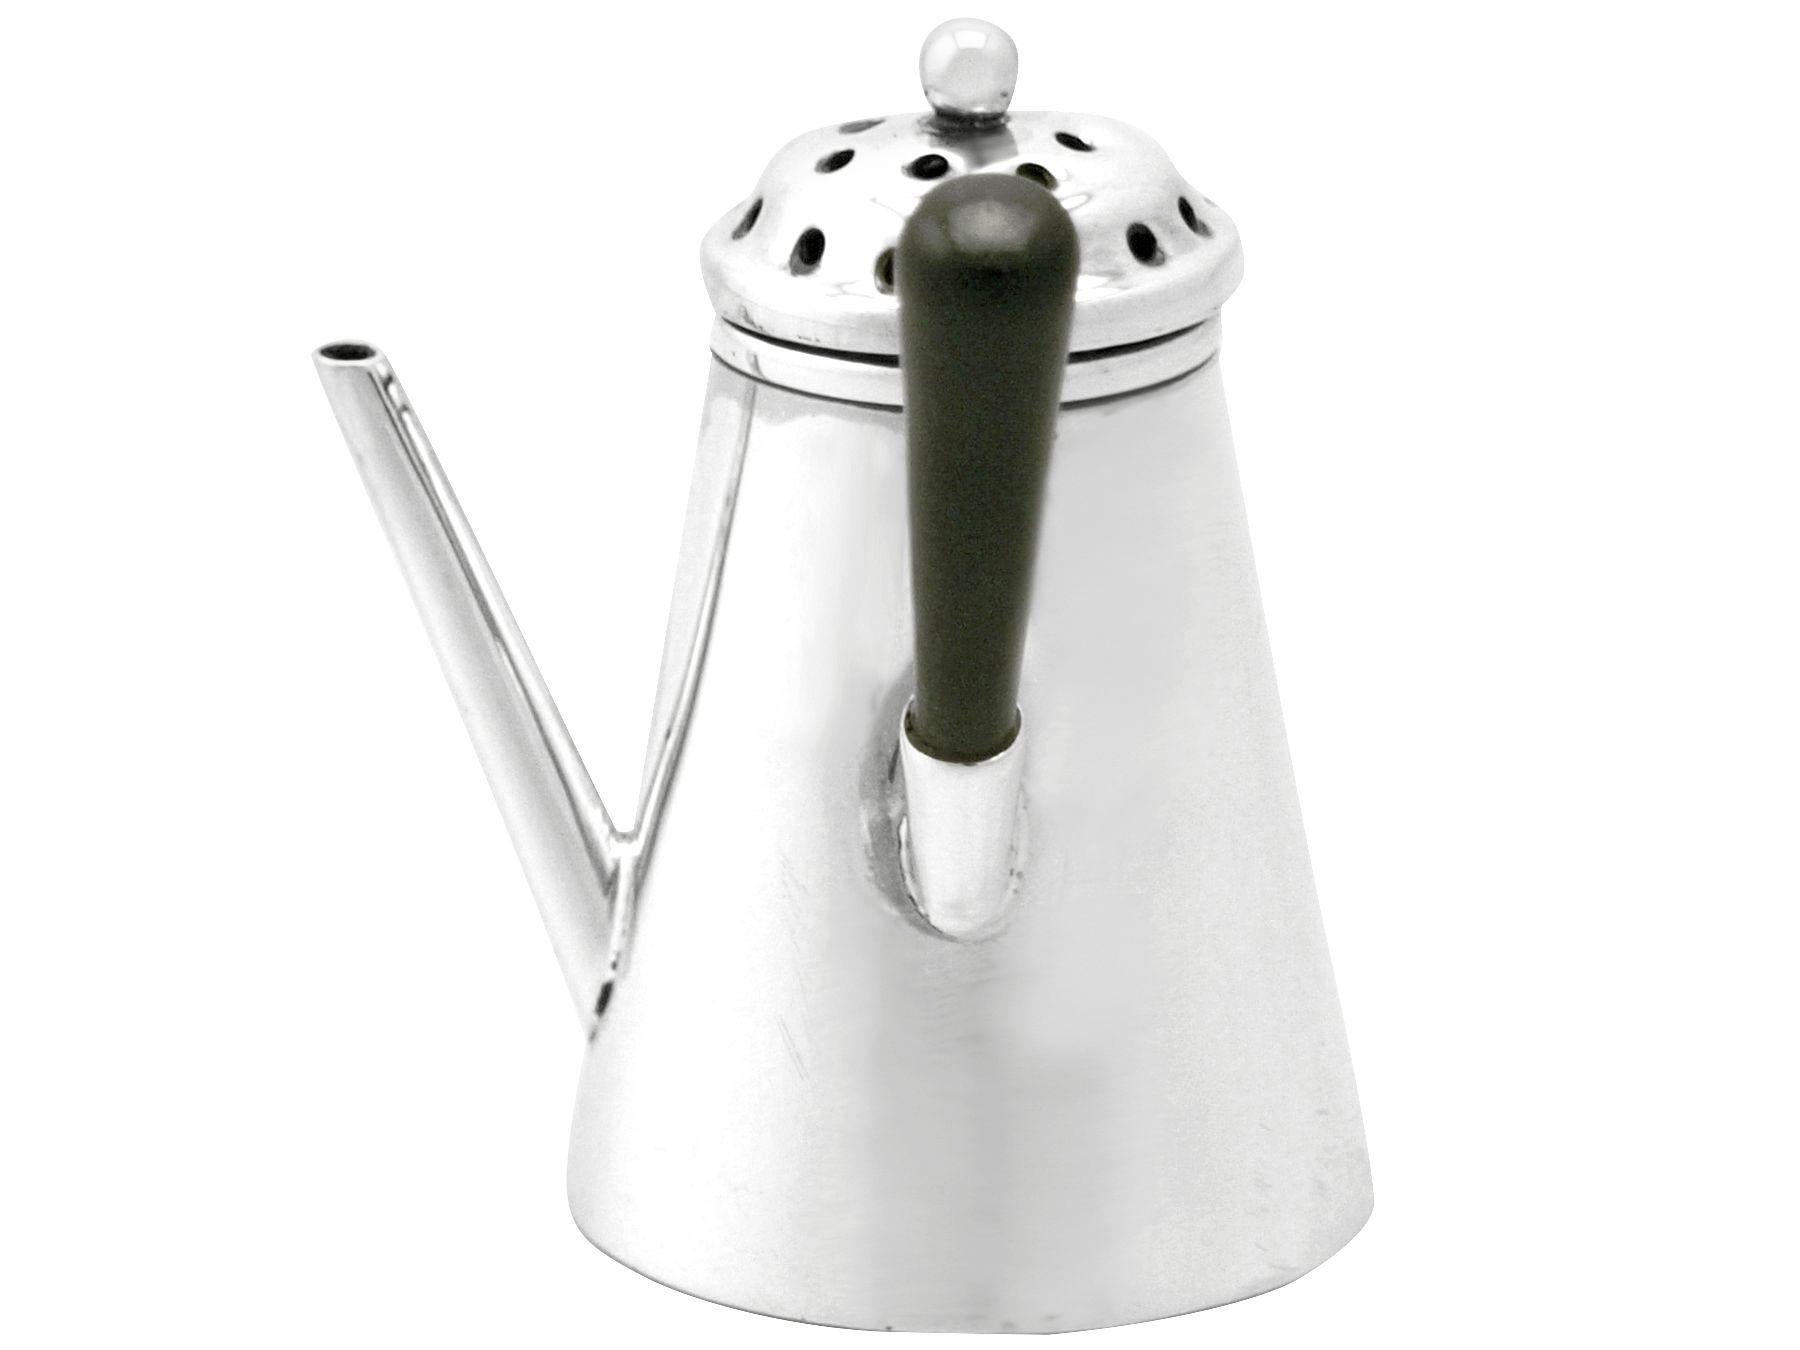 A fine antique Victorian English sterling silver novelty pepper Shaker in the form of a George I style chocolate pot; an addition to our silver cruet and condiments collection.

This fine antique Victorian silver pepper pot has been realistically